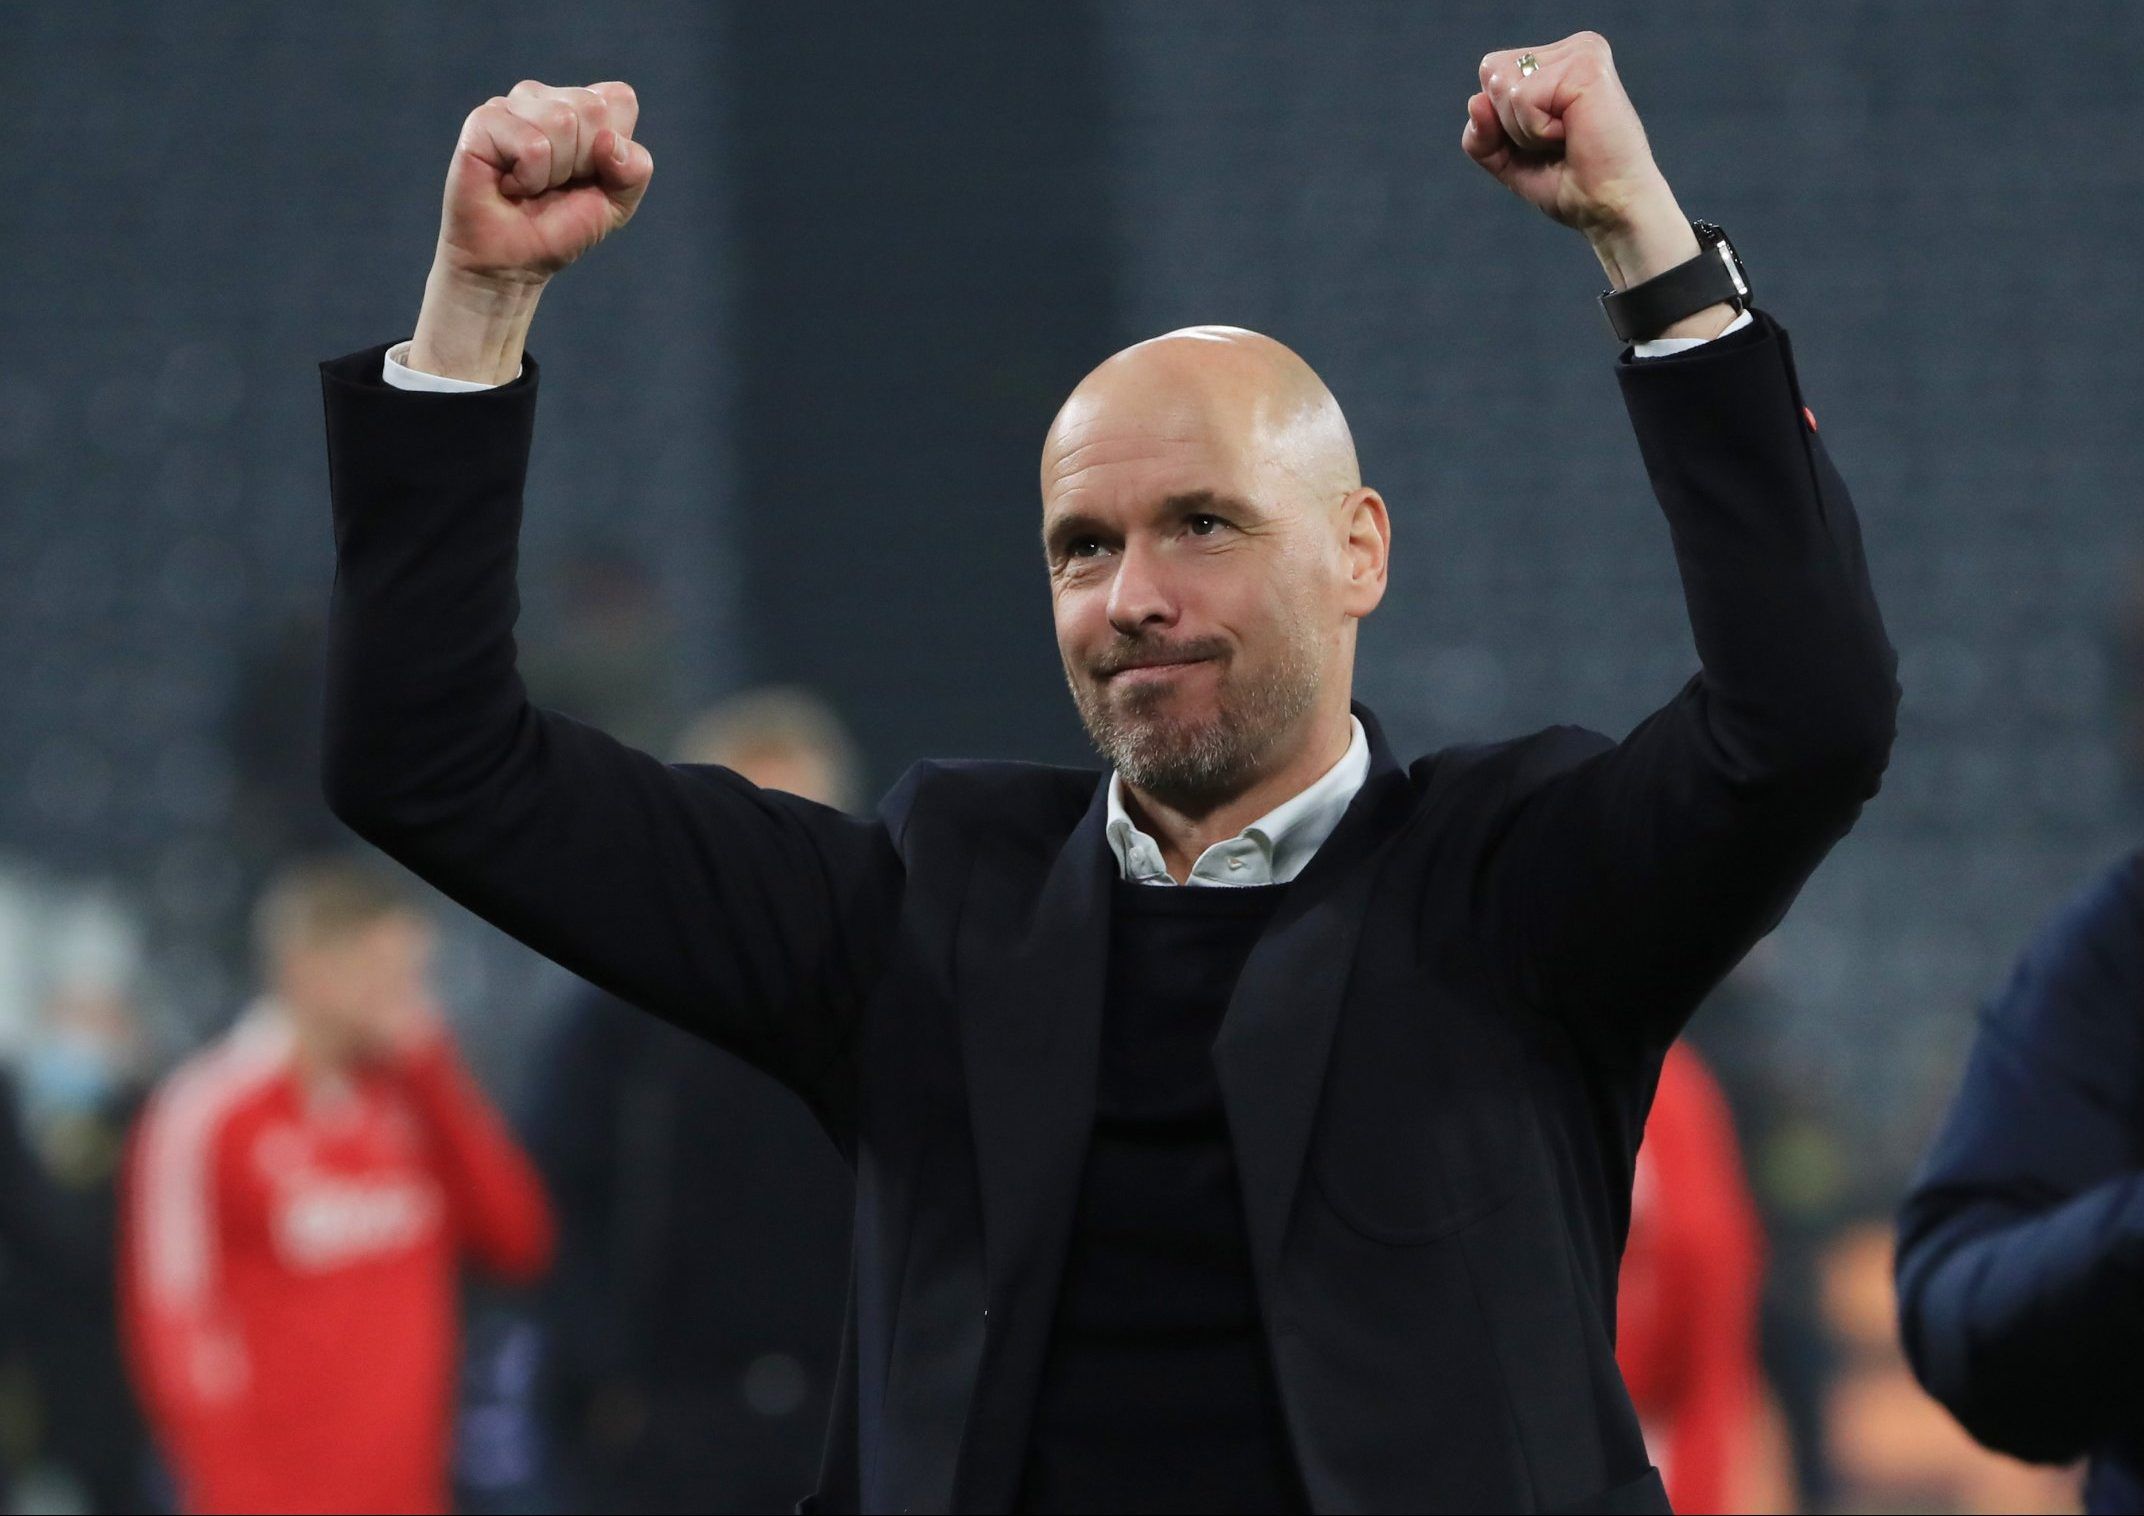 Ajax manager Erik ten Hag taking charge of a Champions League game